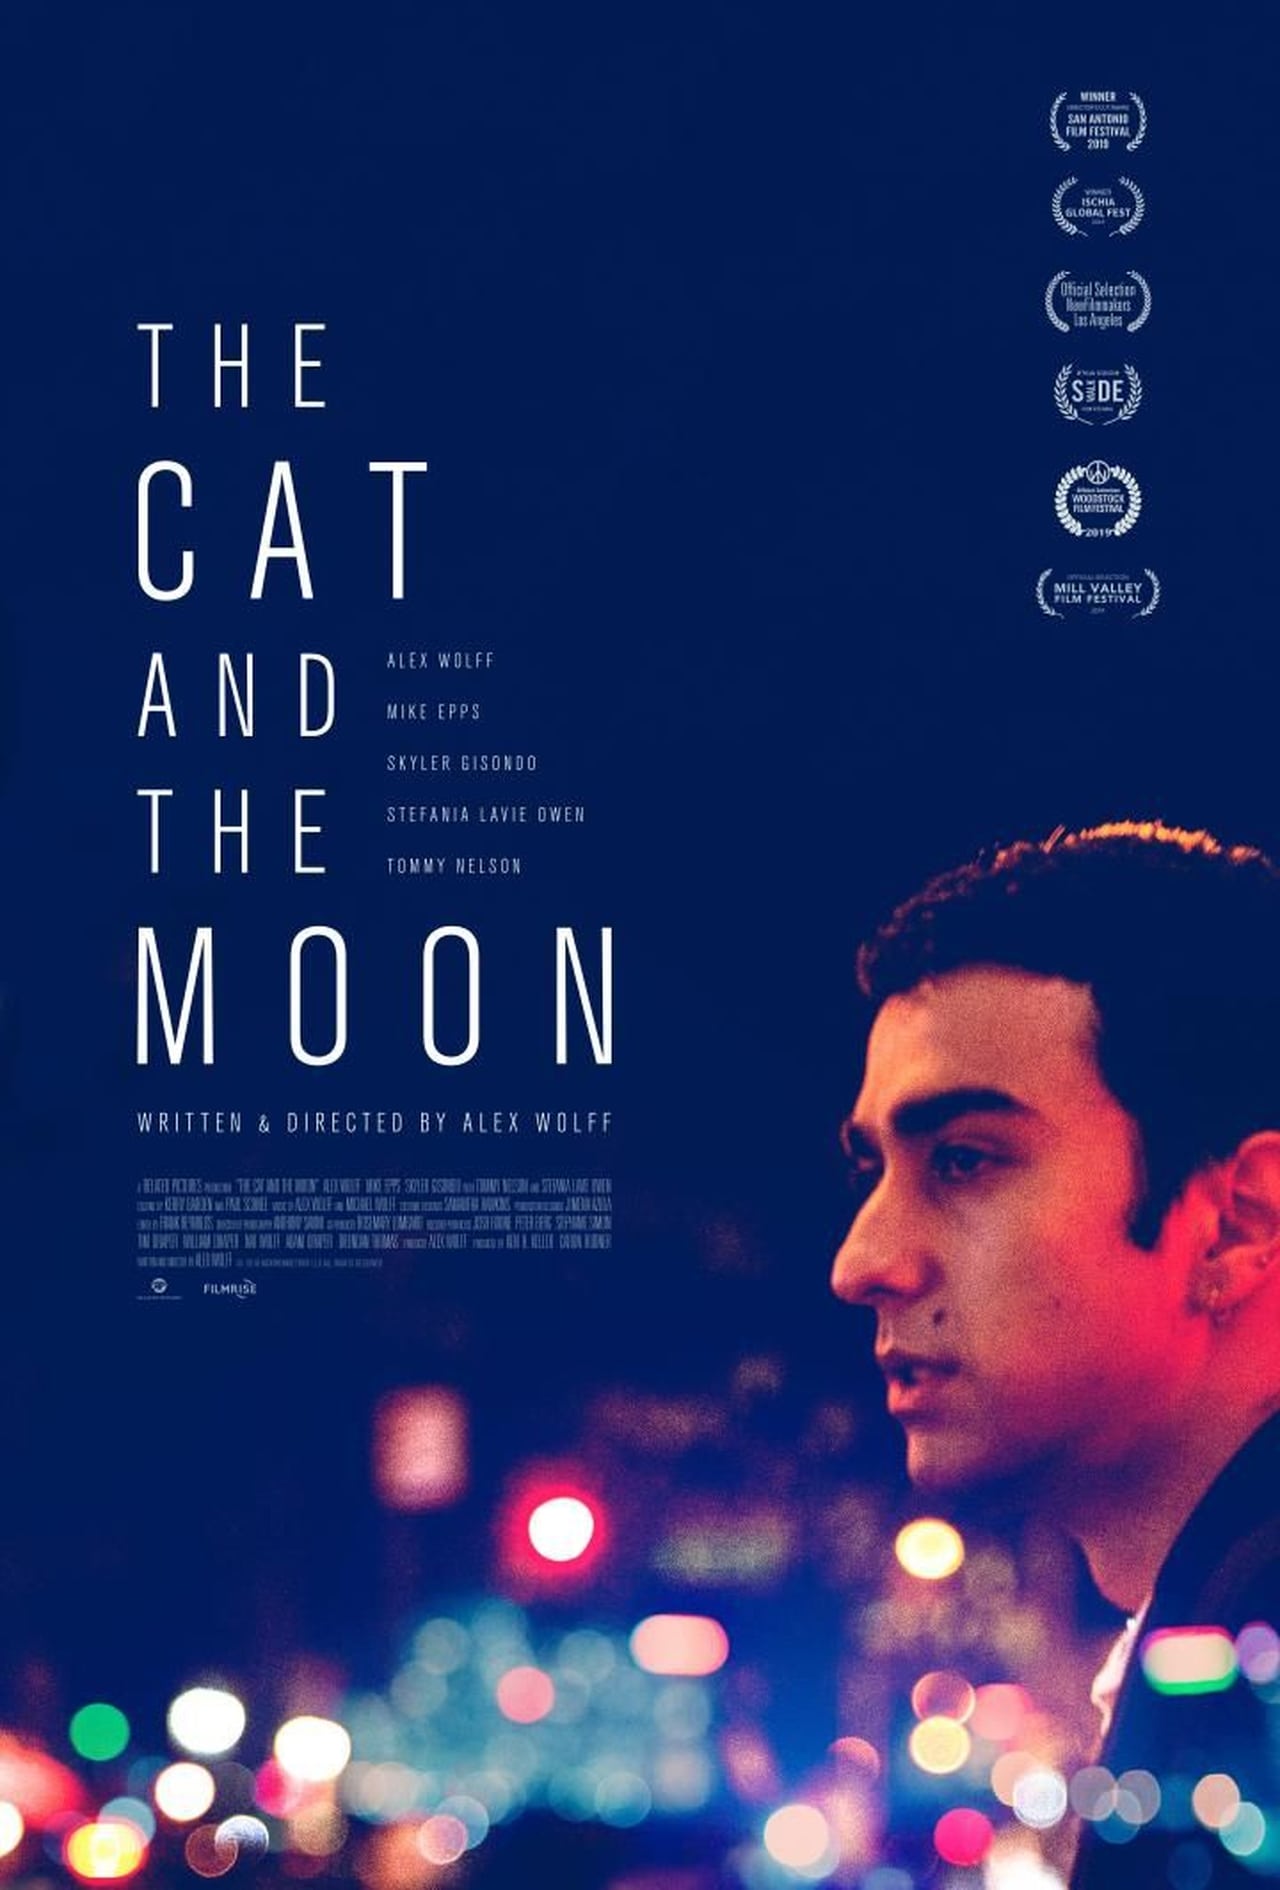 The Cat And The Moon (2019) - Movie Trailer Video